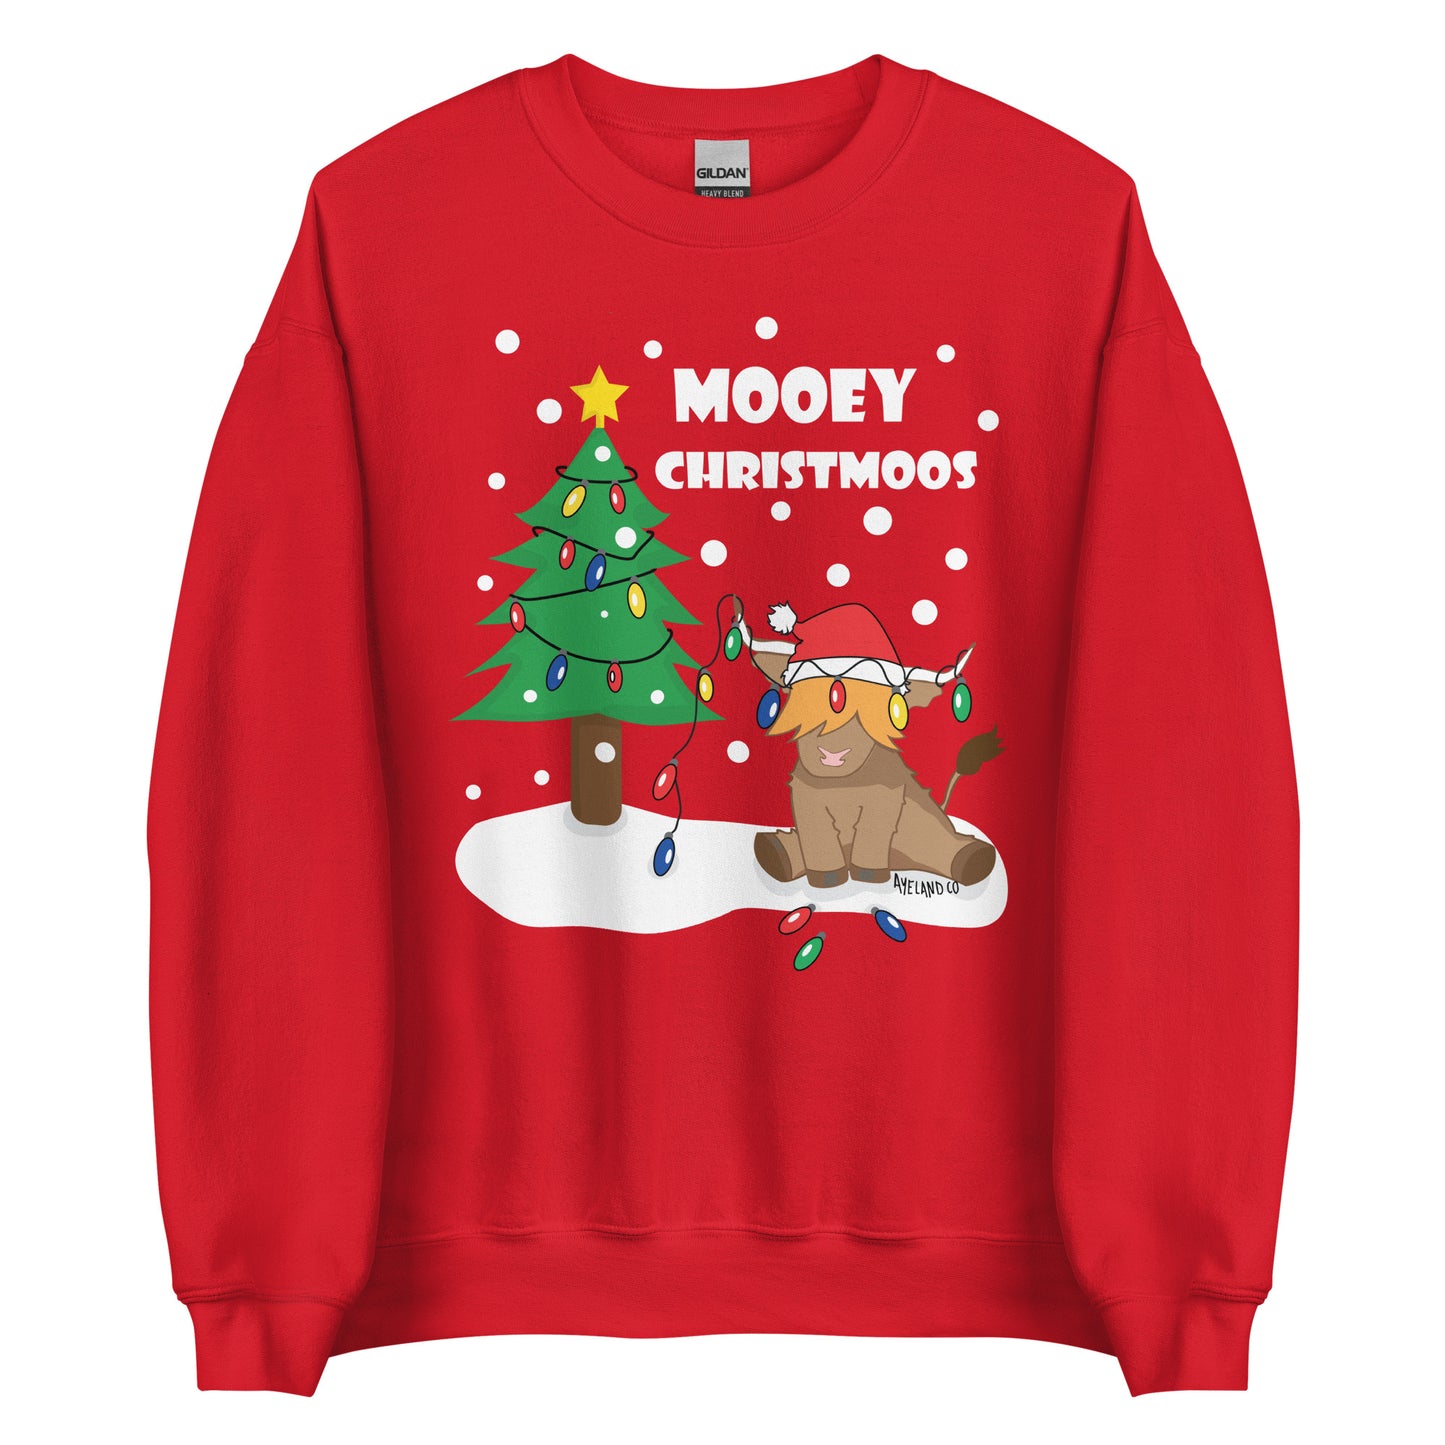 Highland cow mooey christmoos ugly christmas sweatshirt for highland cattle lover men